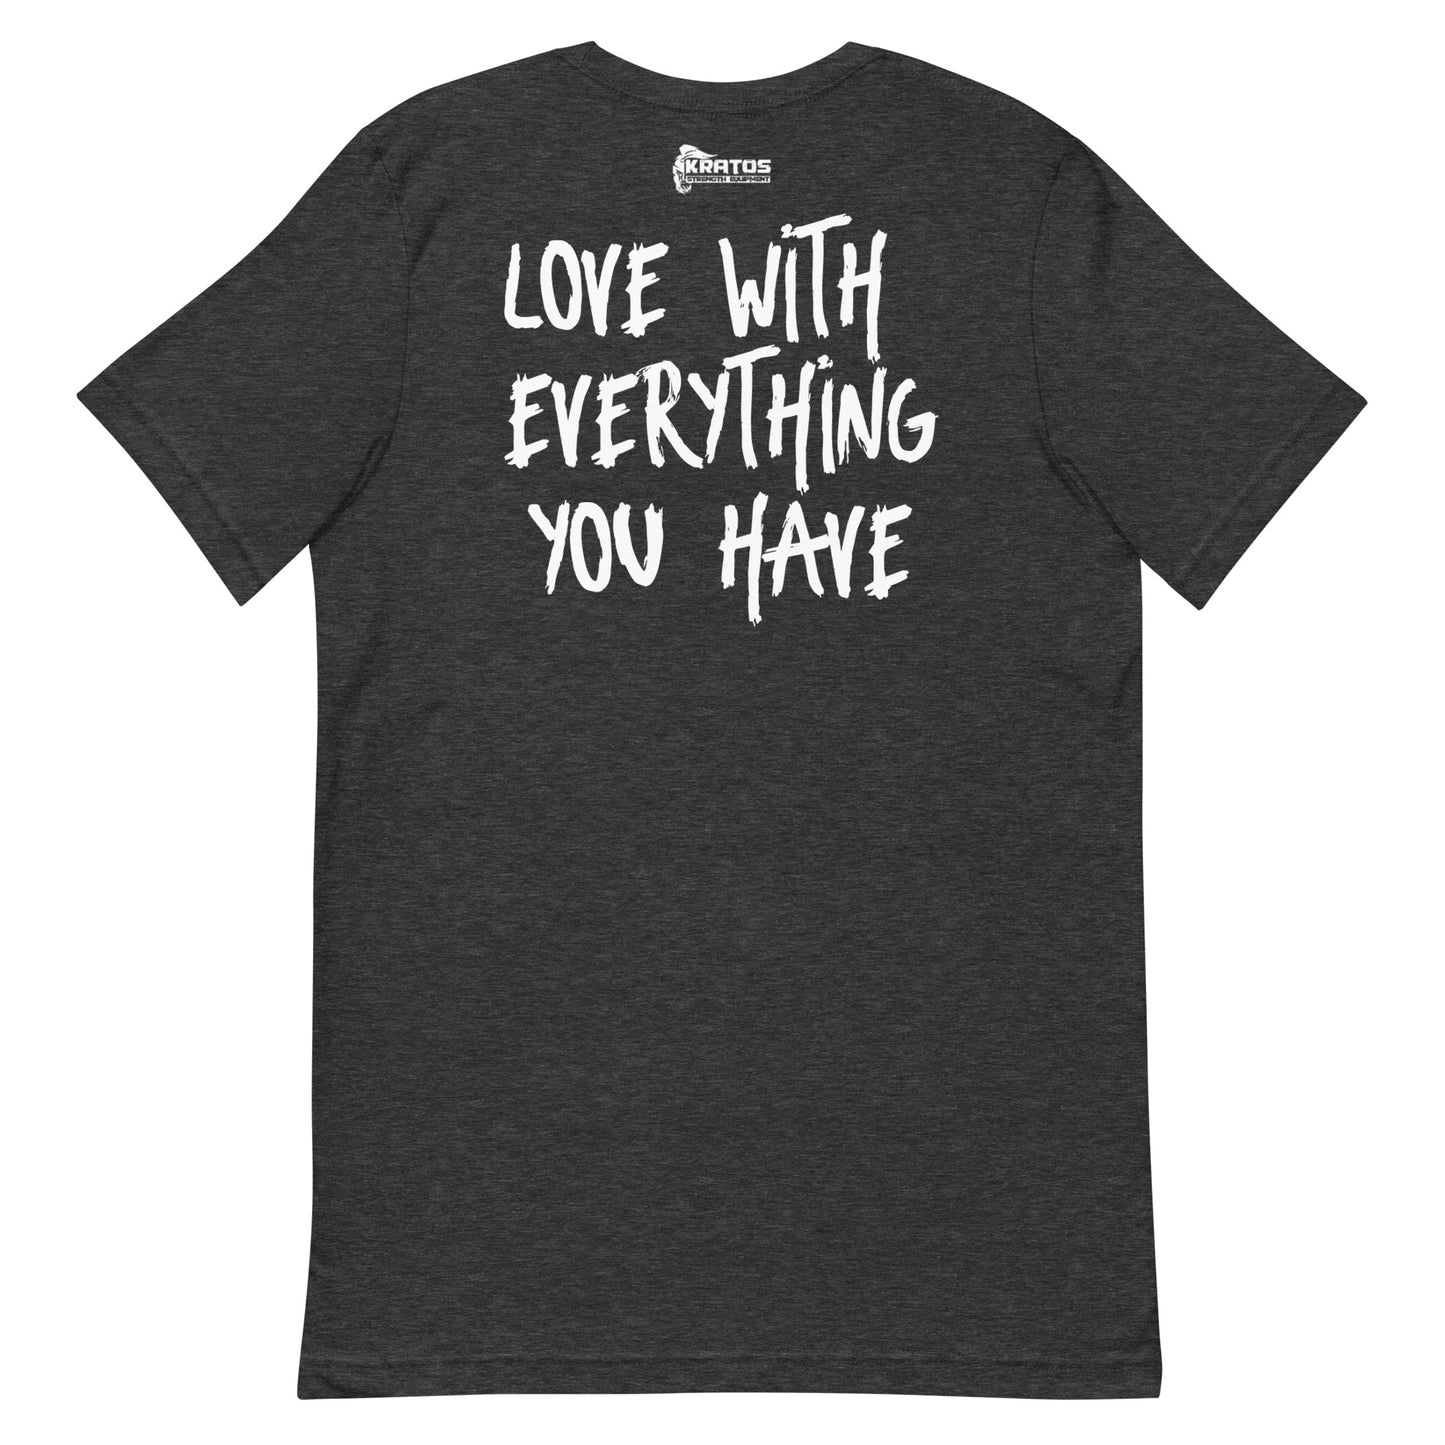 LOVE WITH EVERYTHING YOU HAVE Unisex t-shirt